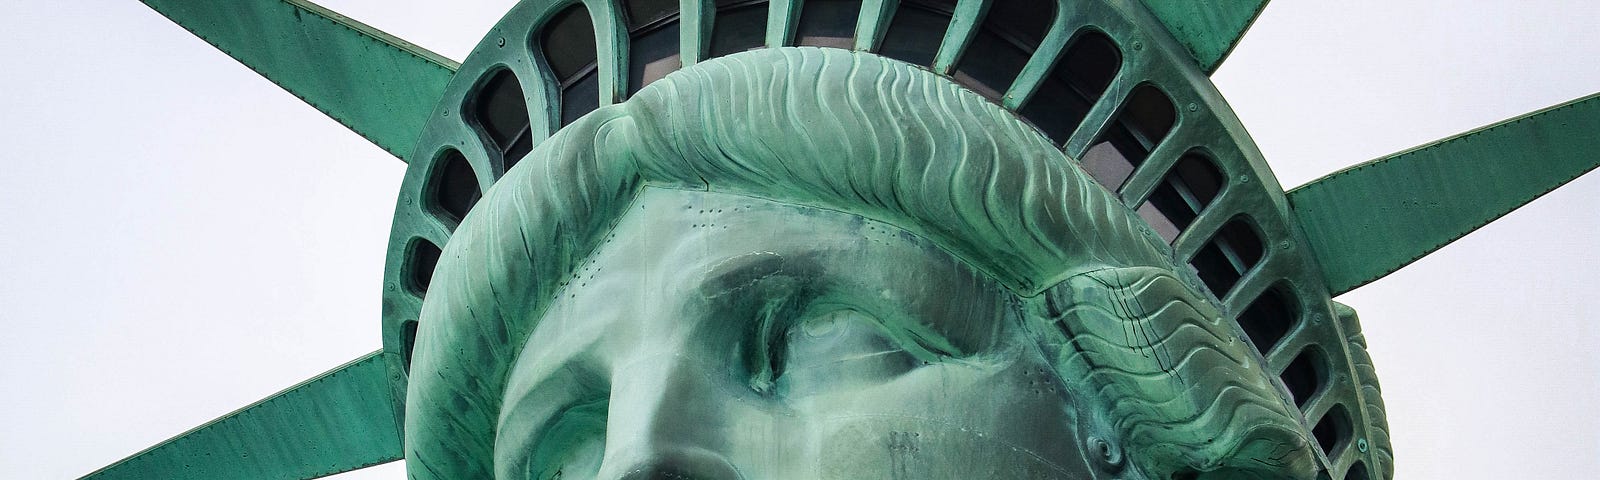 A headshot of the statue of liberty